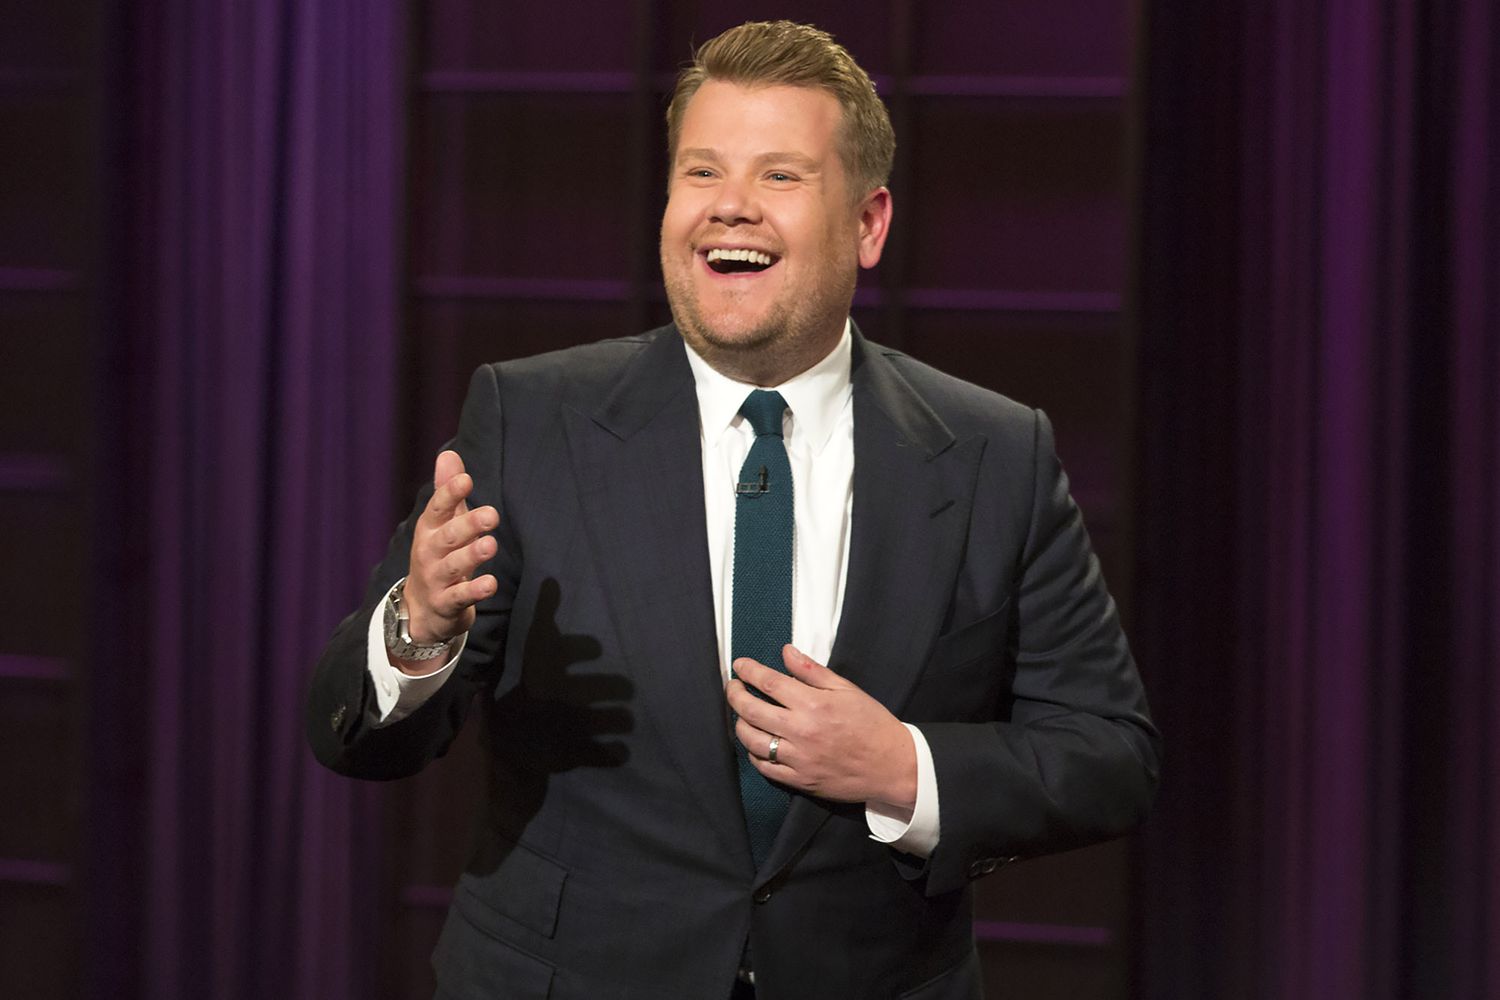 LOS ANGELES - SEPTEMBER 15: u0022The Late Late Show with James Corden,u0022 Thursday, Sept. 15th (12:35 PM-1:37 AM ET/PT) On The CBS Television Network.